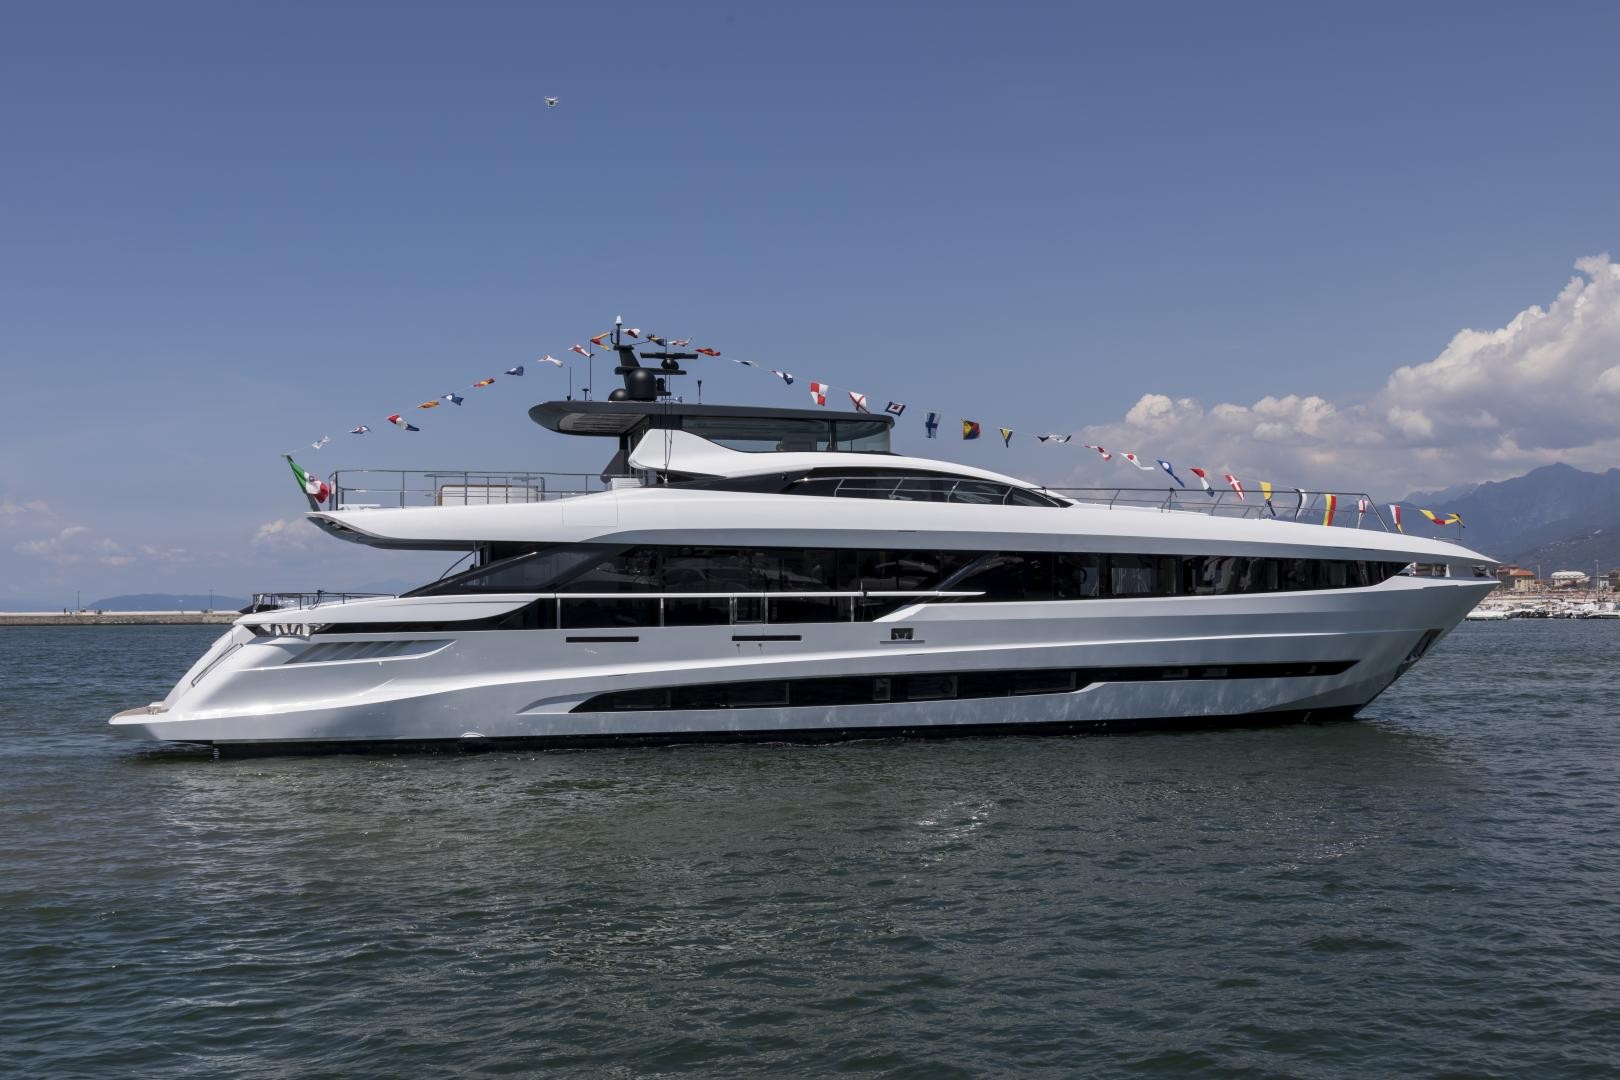 The first unit of the new Mangusta GranSport 33 series was launched